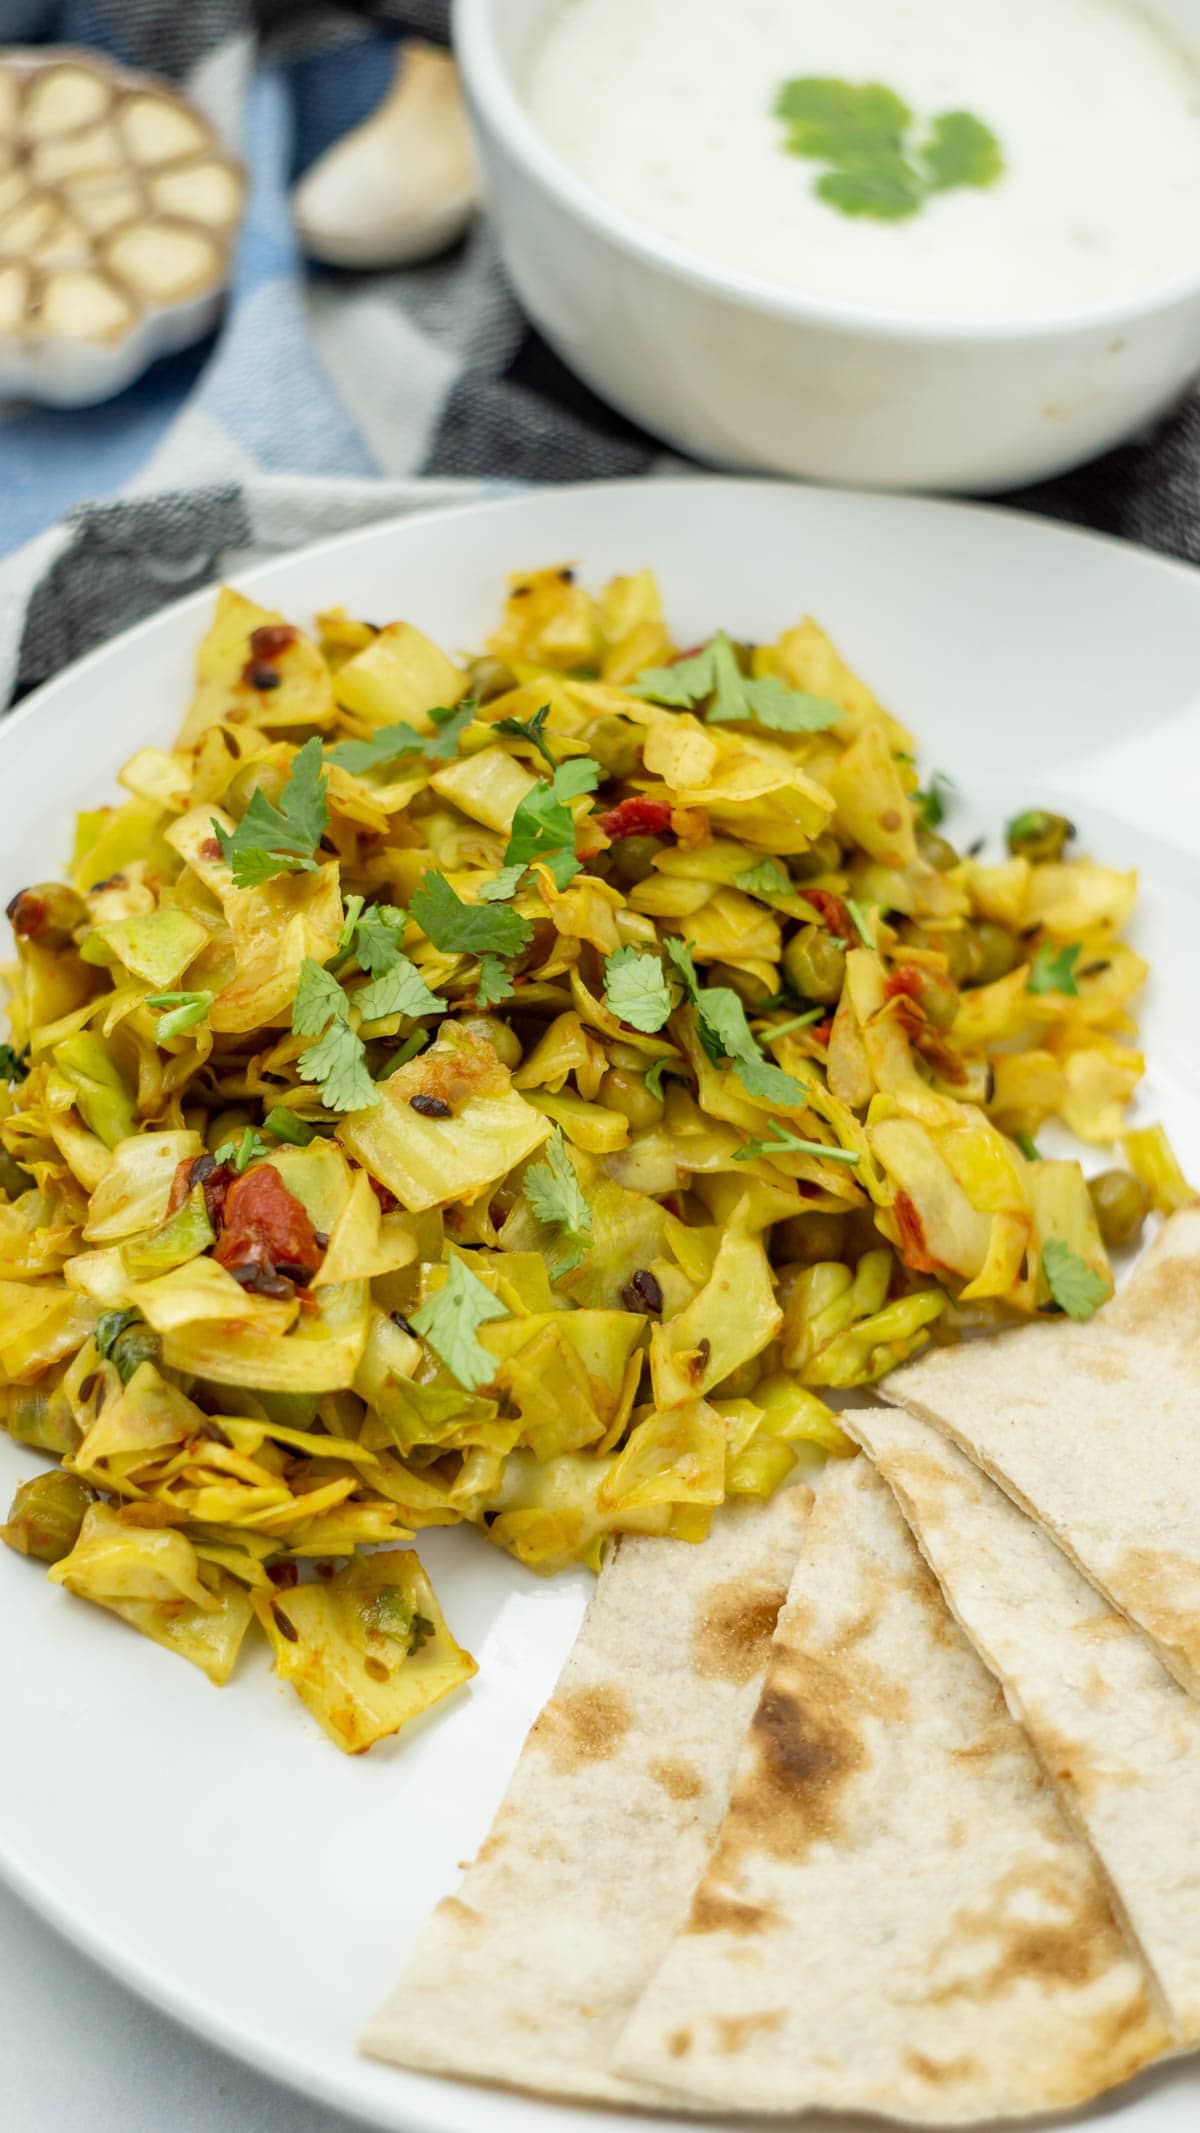 Cabbage peas (patta gobi matar) in a plate served with roti